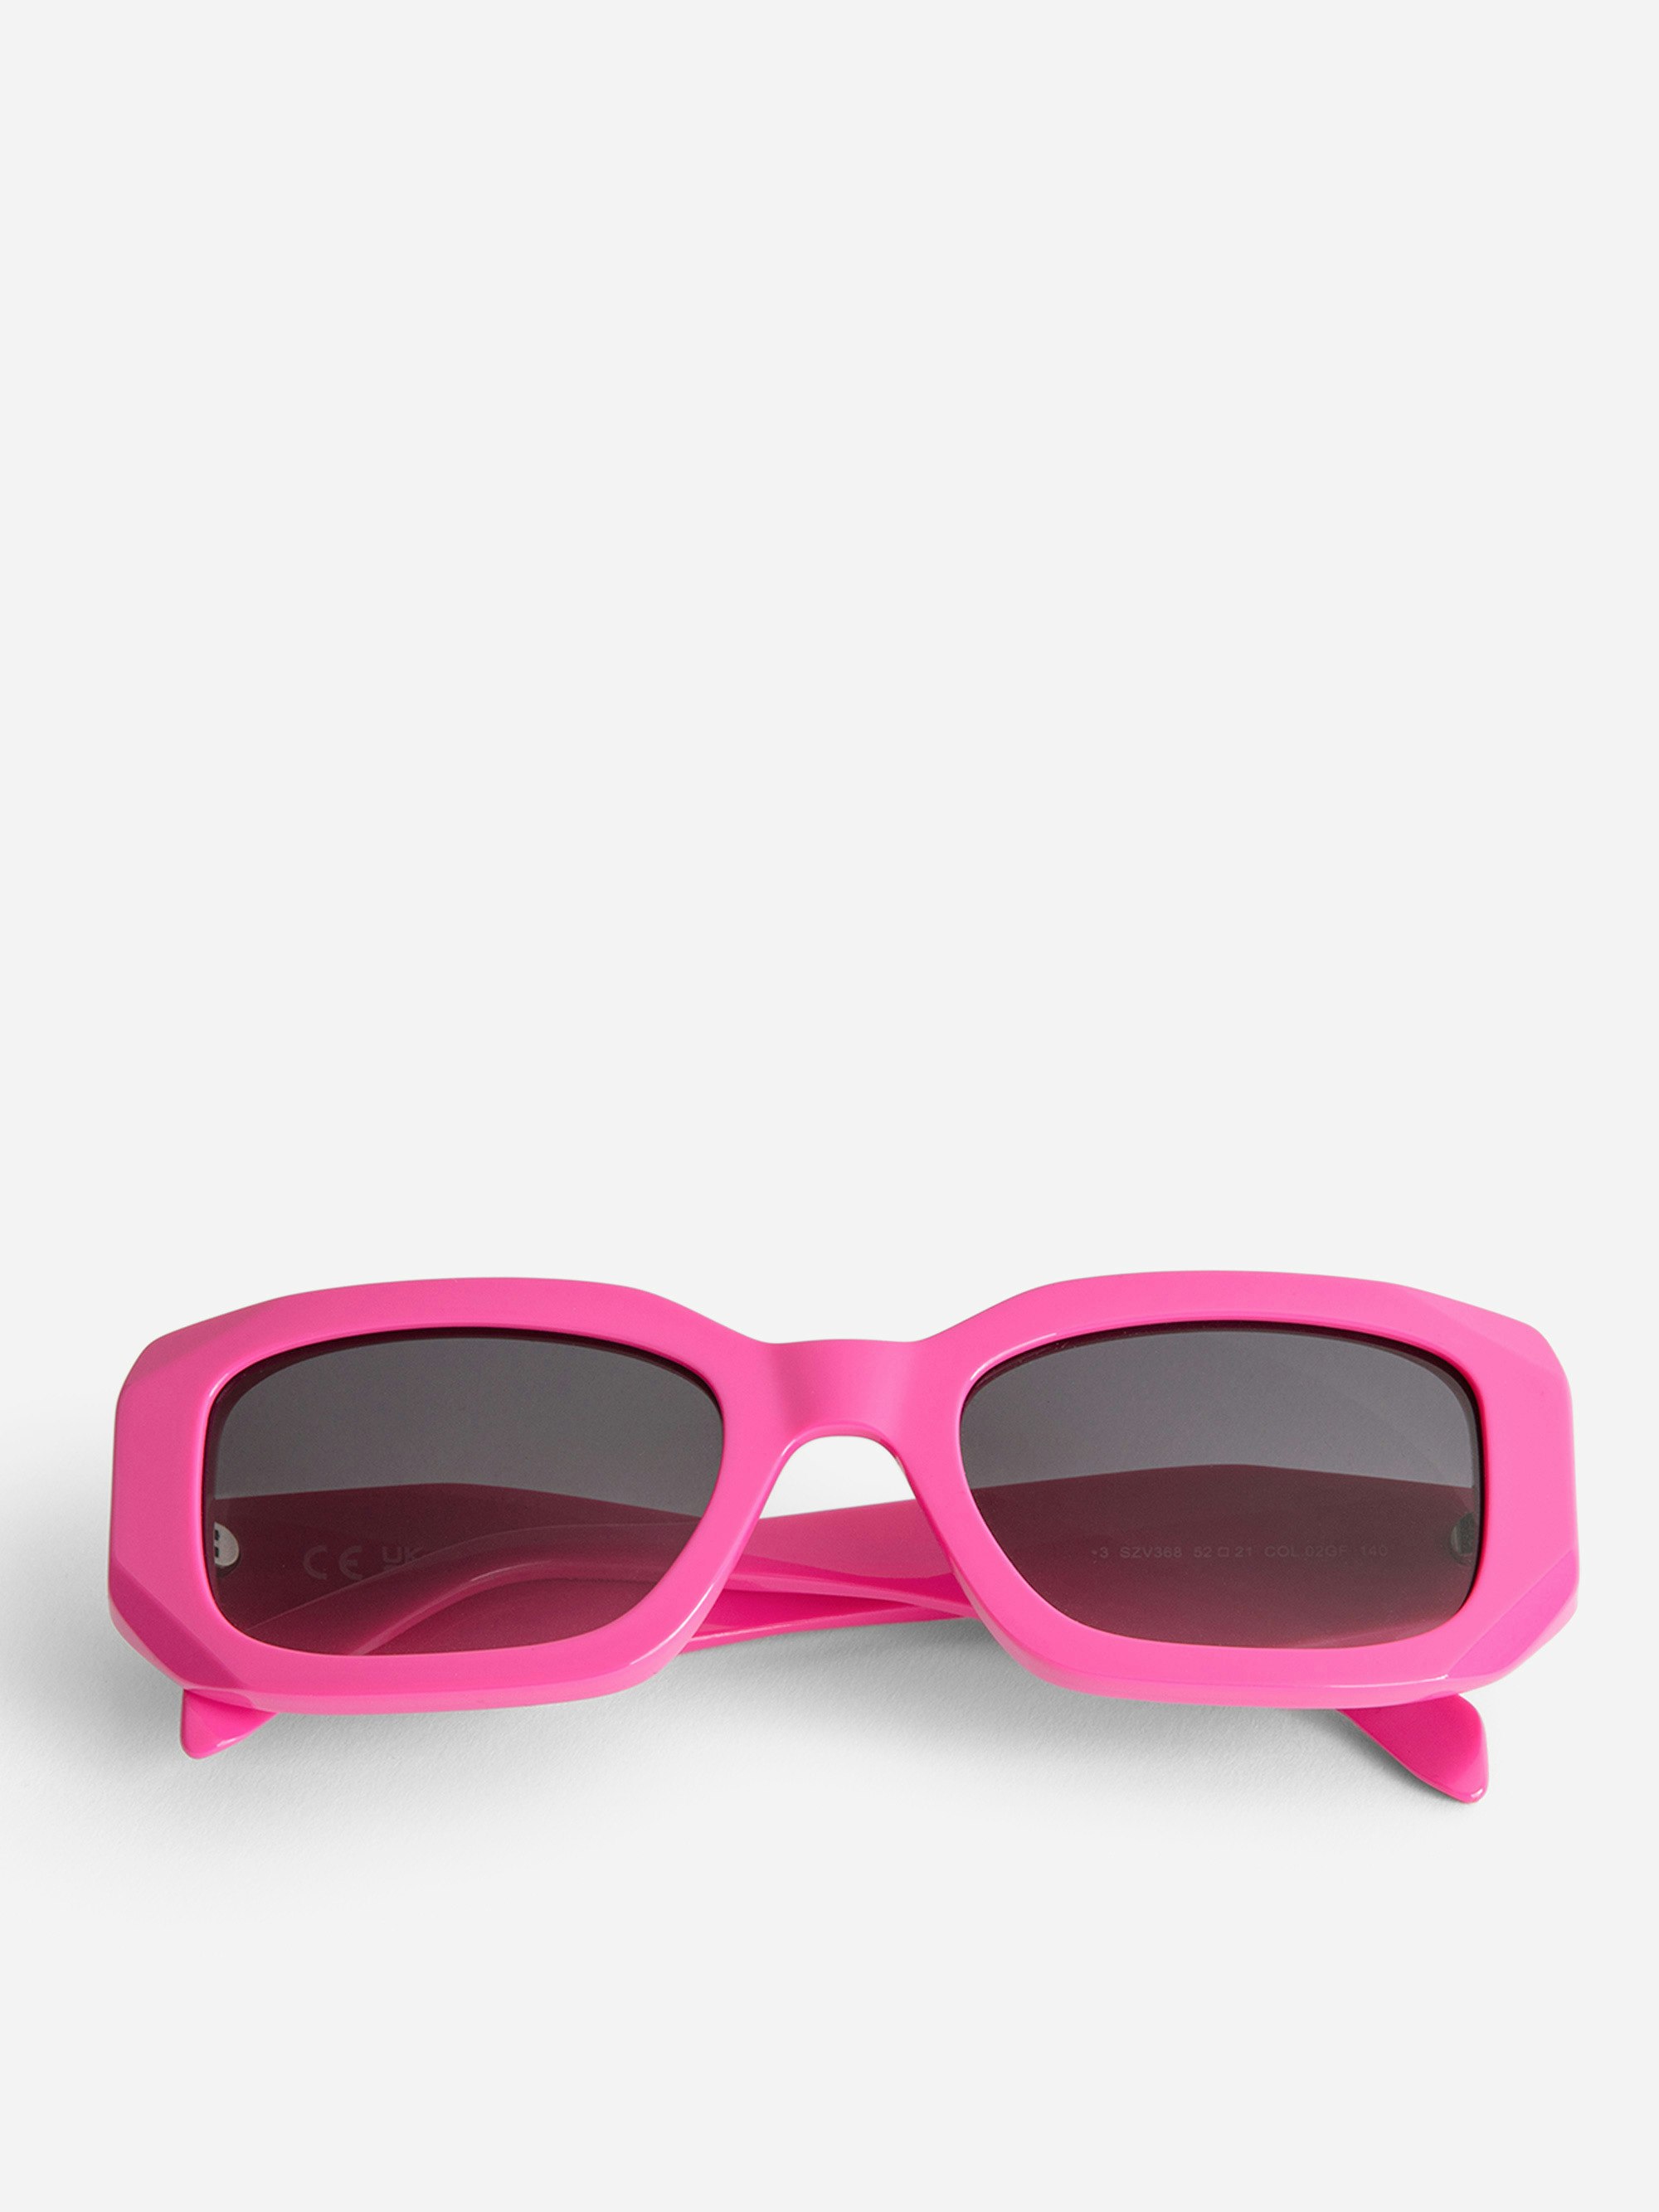 ZV23H3 Sunglasses - Unisex pink rectangular sunglasses with wings on the unstructured temples.